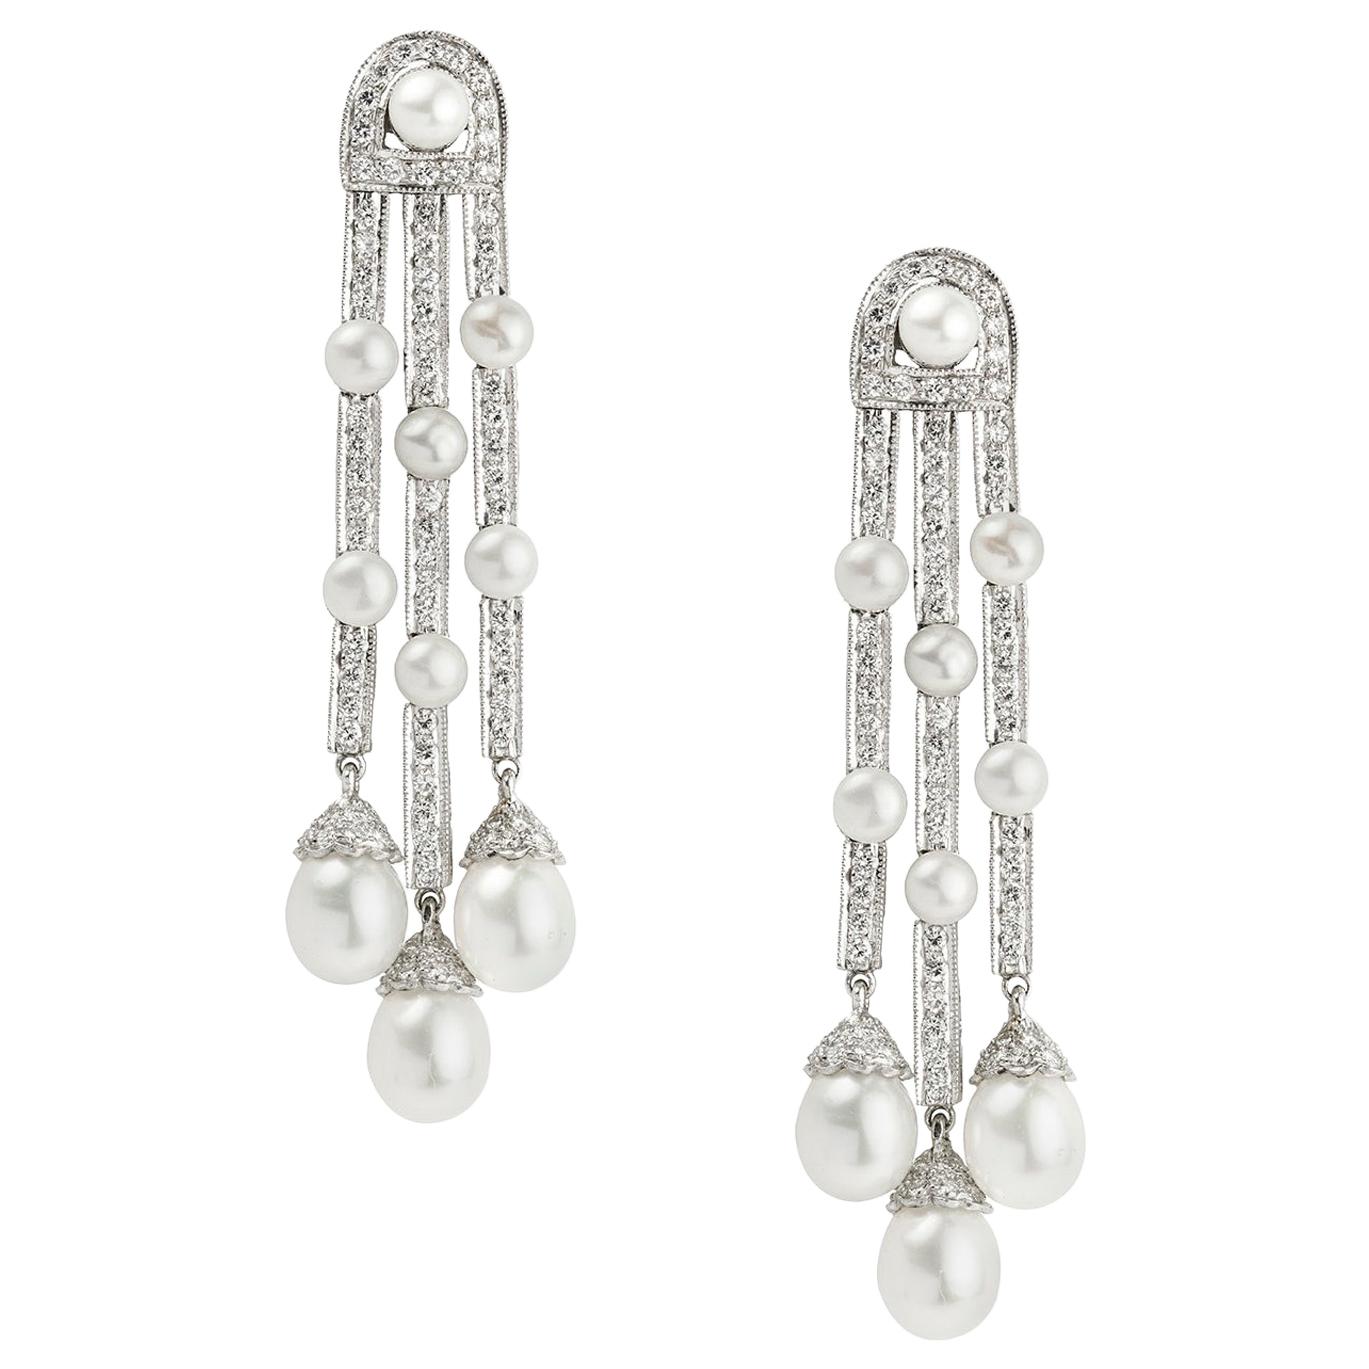 Pair of Diamond and Cultured Pearl Drop Earrings